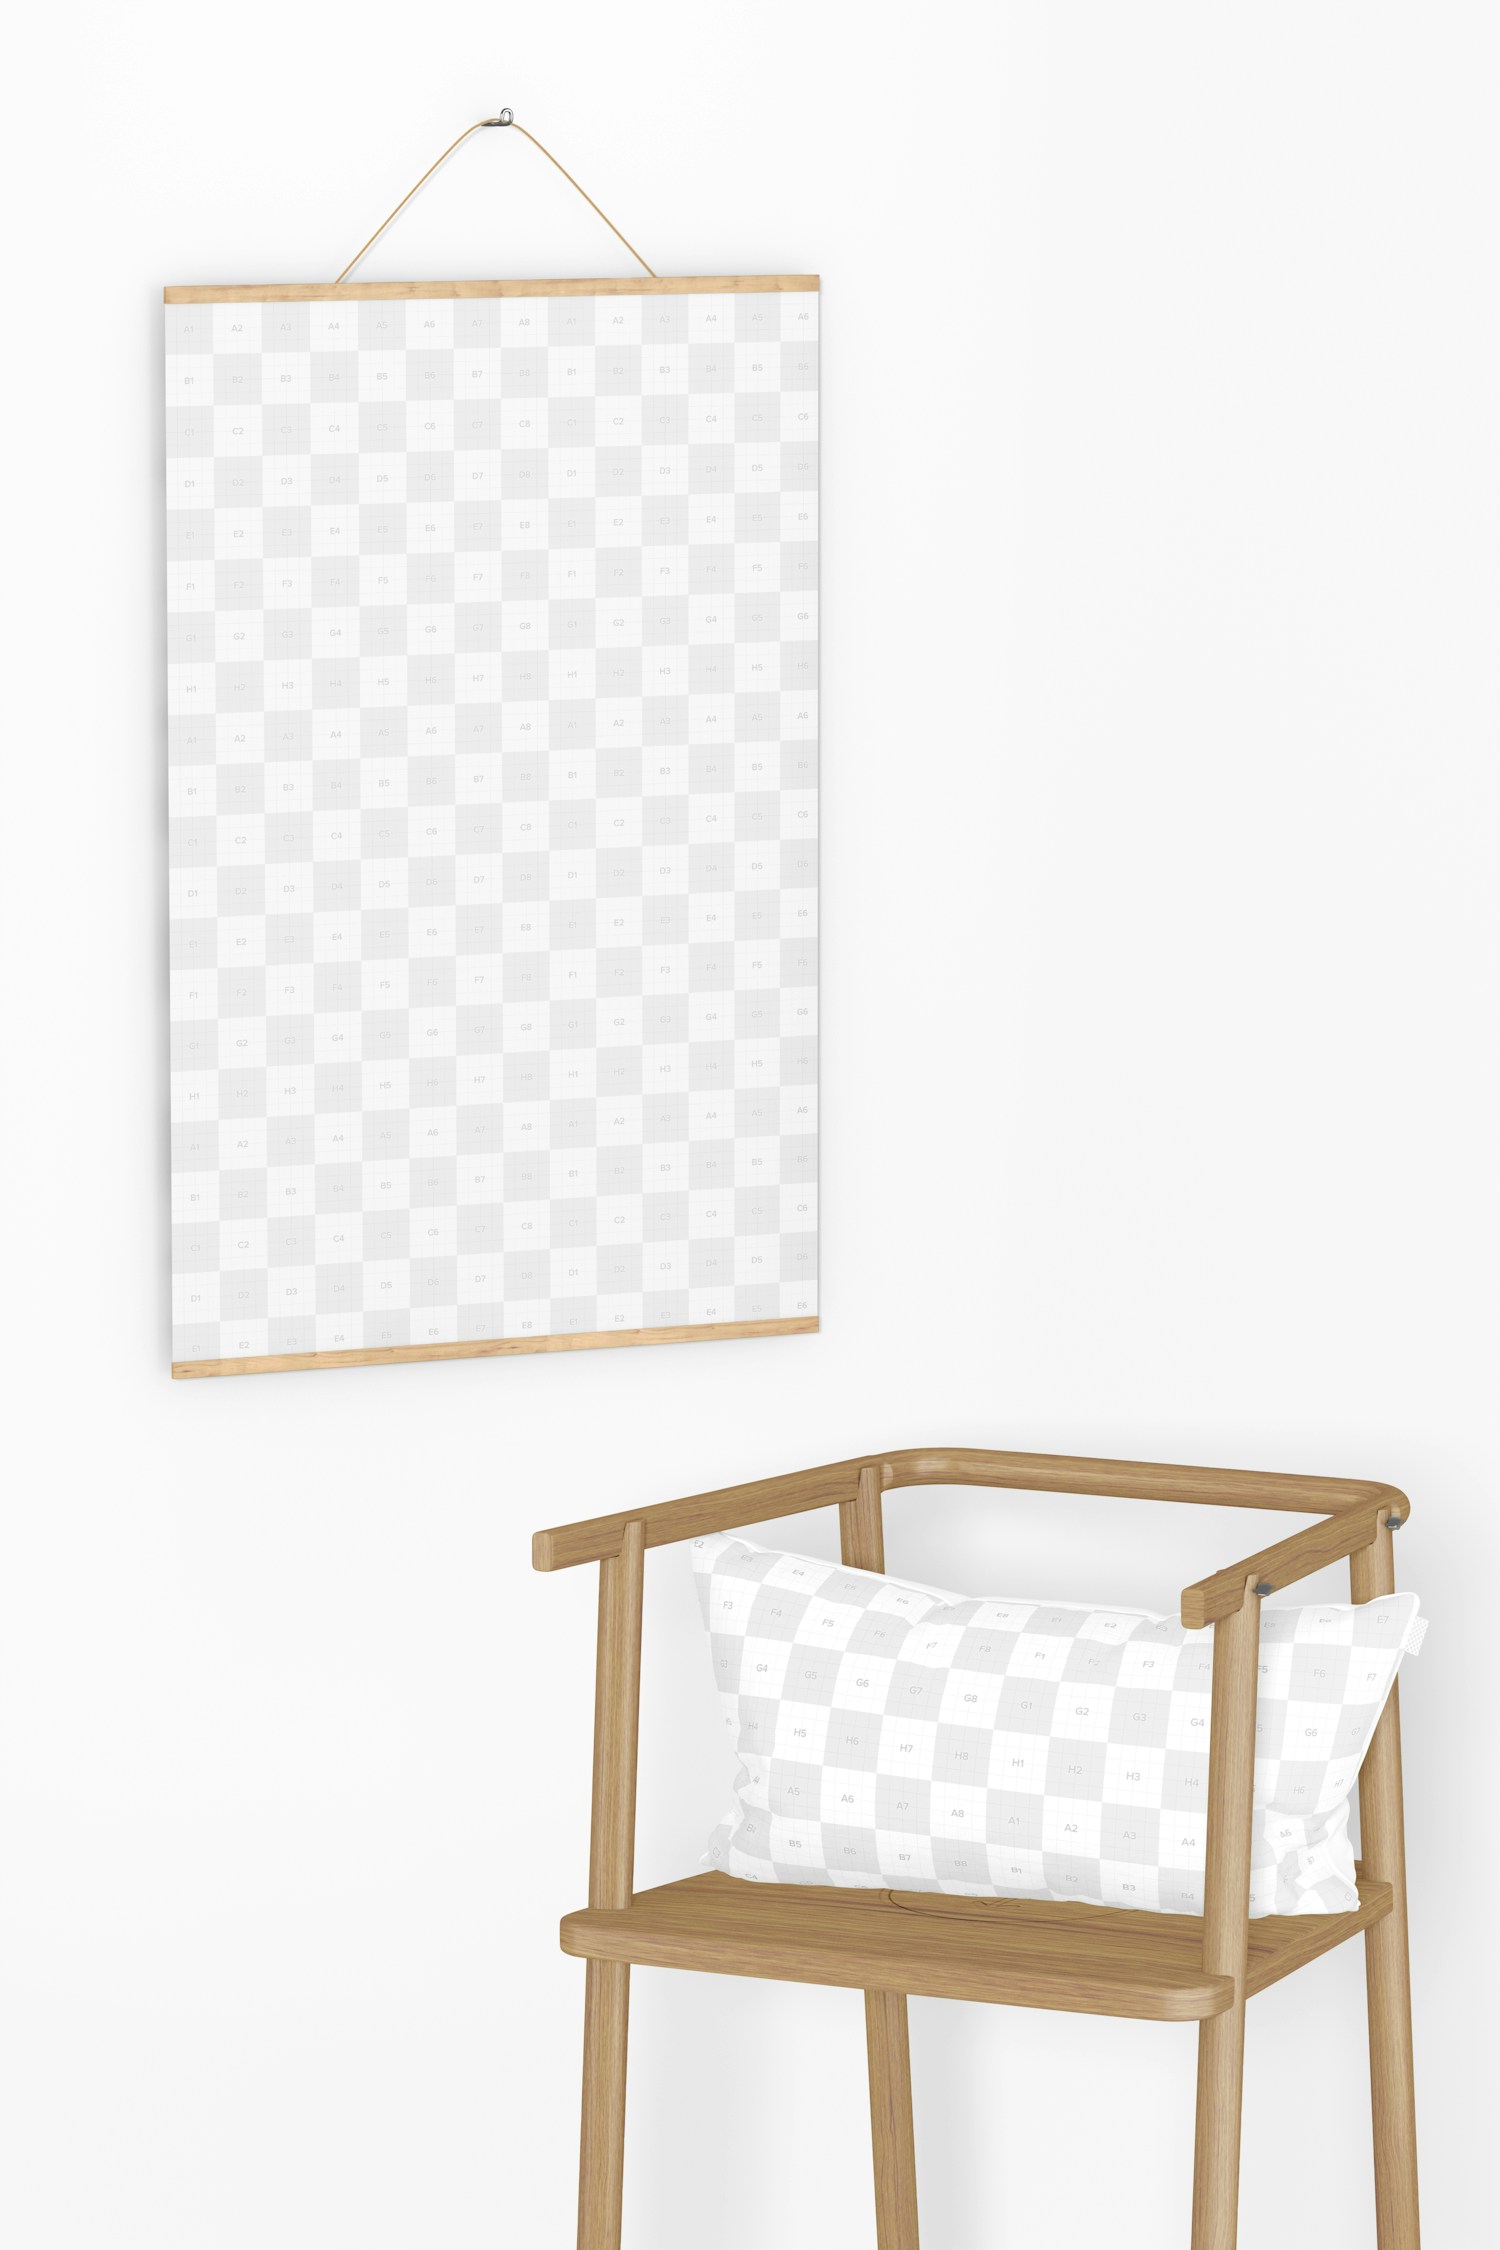 2:3 Wooden Frame Poster Hanger with Chair Mockup